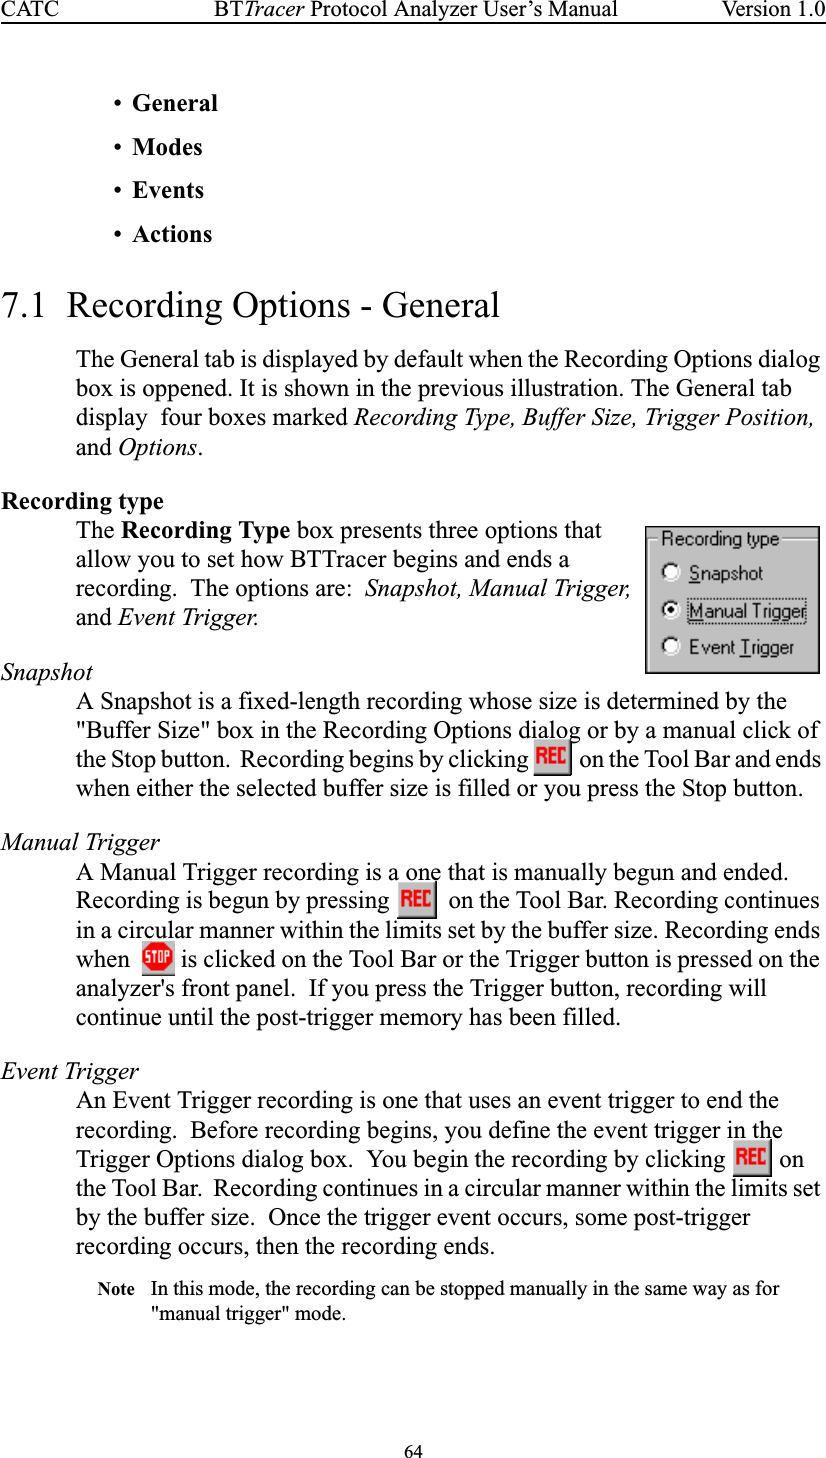 64BTTracer Protocol Analyzer User’s ManualCATC Version 1.0•General•Modes•Events•Actions7.1 Recording Options - GeneralThe General tab is displayed by default when the Recording Options dialogbox is oppened. It is shown in the previous illustration. The General tabdisplay four boxes marked Recording Type, Buffer Size, Trigger Position,and Options.Recording typeThe Recording Type box presents three options thatallow you to set how BTTracer begins and ends arecording. The options are: Snapshot, Manual Trigger,and Event Trigger.SnapshotA Snapshot is a fixed-length recording whose size is determined by the&quot;Buffer Size&quot; box in the Recording Options dialog or by a manual click ofthe Stop button. Recording begins by clicking on the Tool Bar and endswhen either the selected buffer size is filled or you press the Stop button.Manual TriggerA Manual Trigger recording is a one that is manually begun and ended.Recording is begun by pressing on the Tool Bar. Recording continuesin a circular manner within the limits set by the buffer size. Recording endswhen is clicked on the Tool Bar or the Trigger button is pressed on theanalyzer&apos;s front panel. If you press the Trigger button, recording willcontinue until the post-trigger memory has been filled.Event TriggerAn Event Trigger recording is one that uses an event trigger to end therecording. Before recording begins, you define the event trigger in theTrigger Options dialog box. You begin the recording by clicking onthe Tool Bar. Recording continues in a circular manner within the limits setby the buffer size. Once the trigger event occurs, some post-triggerrecording occurs, then the recording ends.Note In this mode, the recording can be stopped manually in the same way as for&quot;manual trigger&quot; mode.